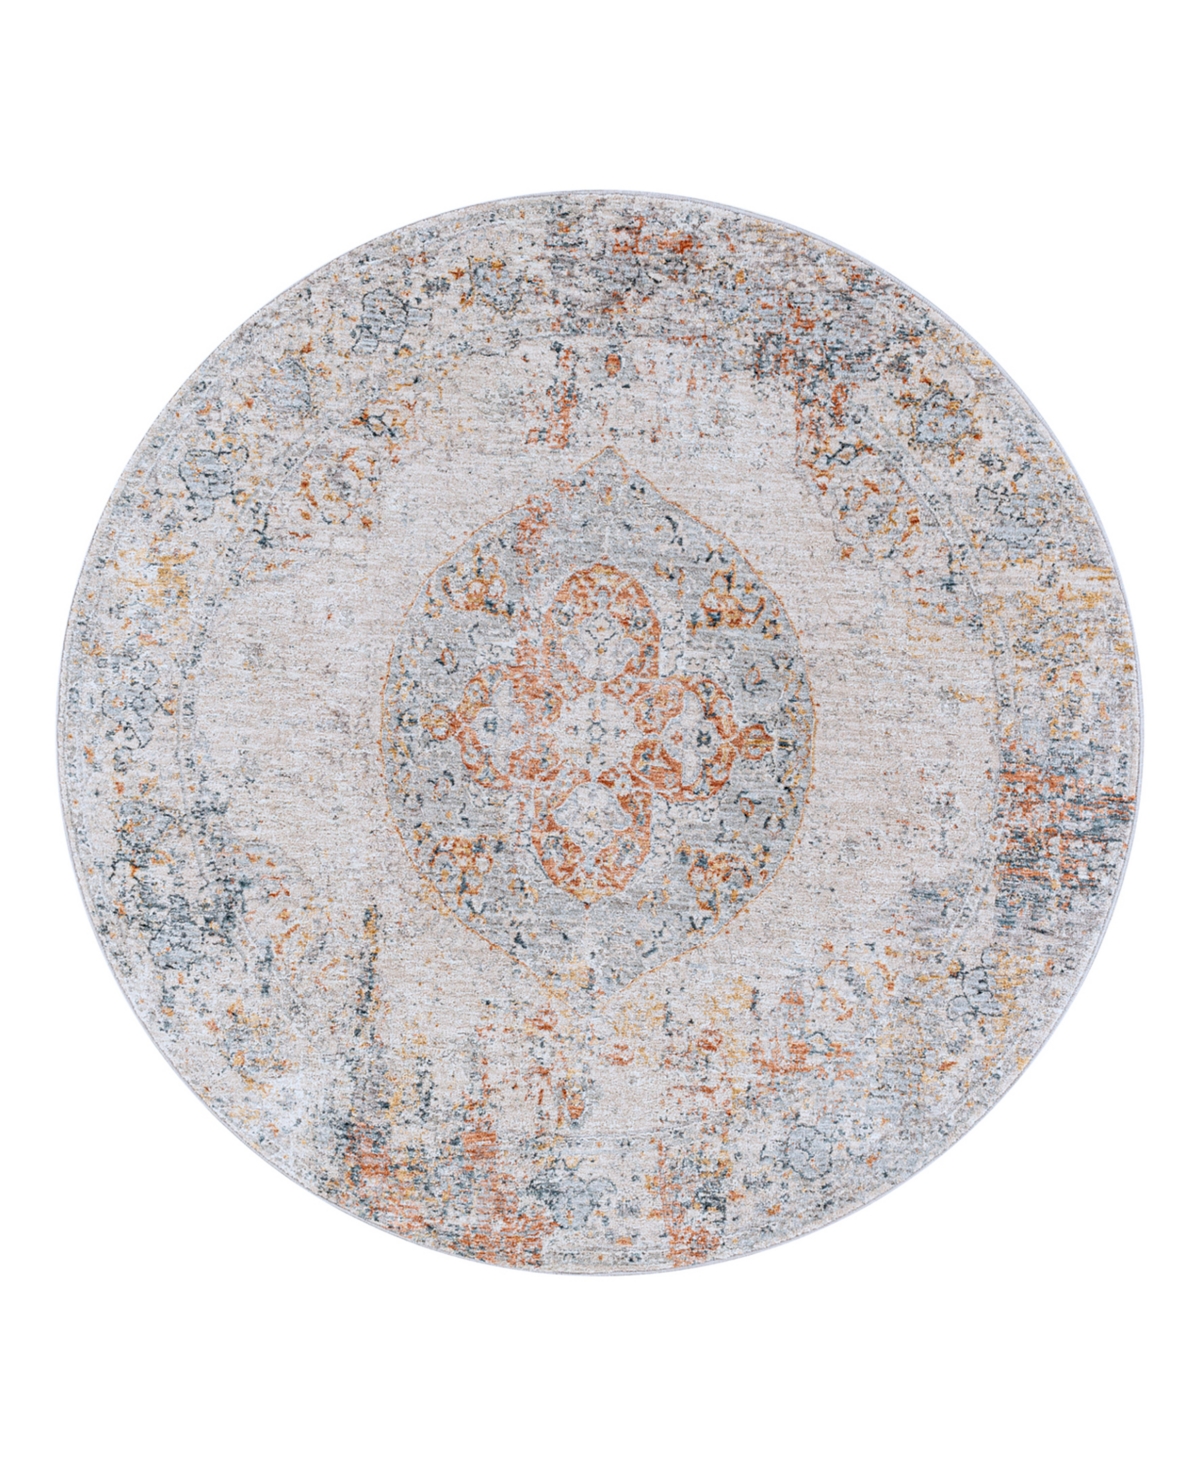 Shop Surya Laila Laa-2306 6'7x6'7 Round Area Rug In Red